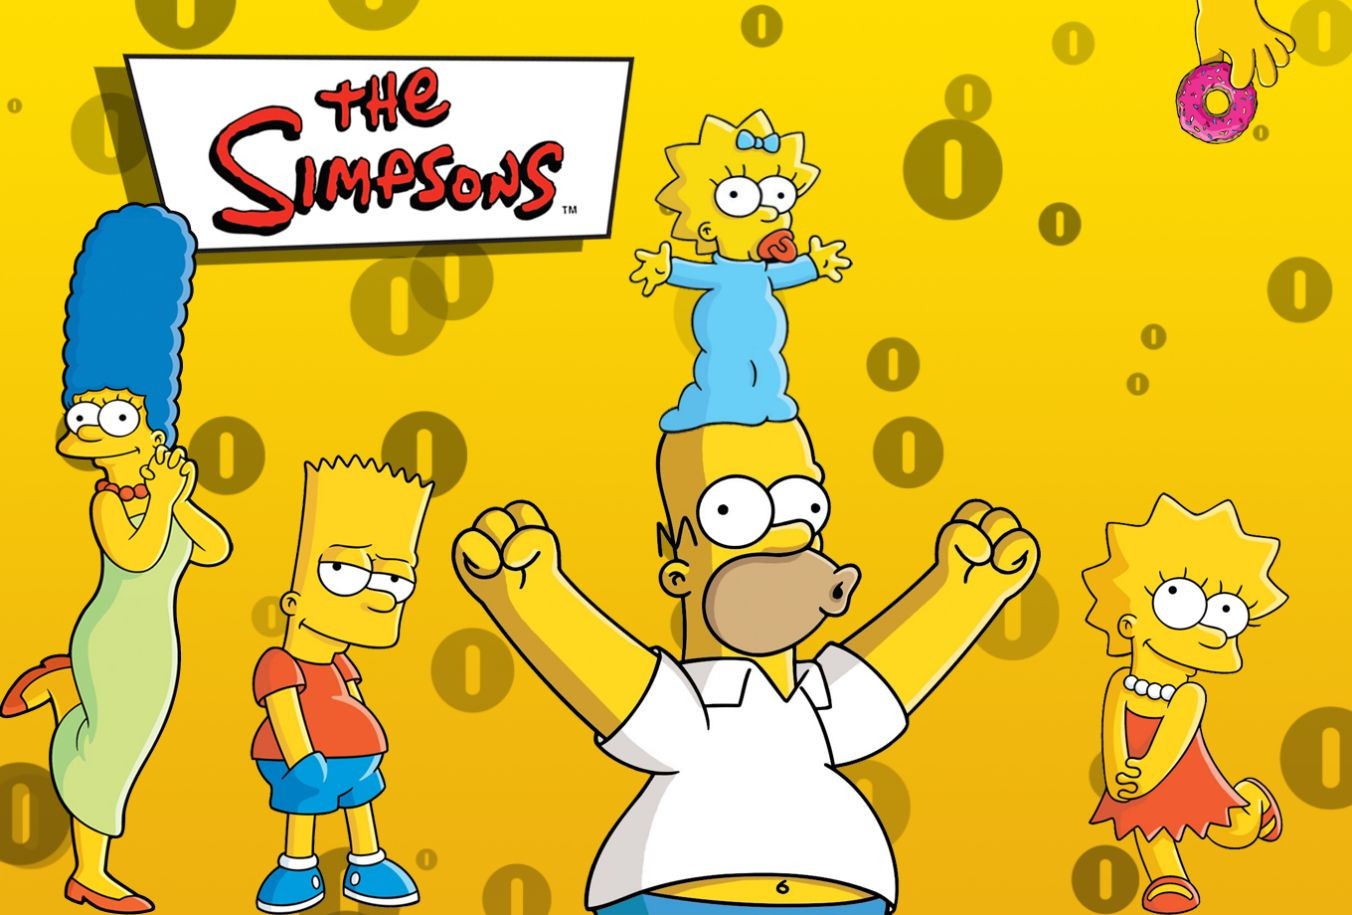 The Simpsons Marge Simpson Bart Simpson Maggie Simpson Homer Simpson Lisa Simpson 1352x915